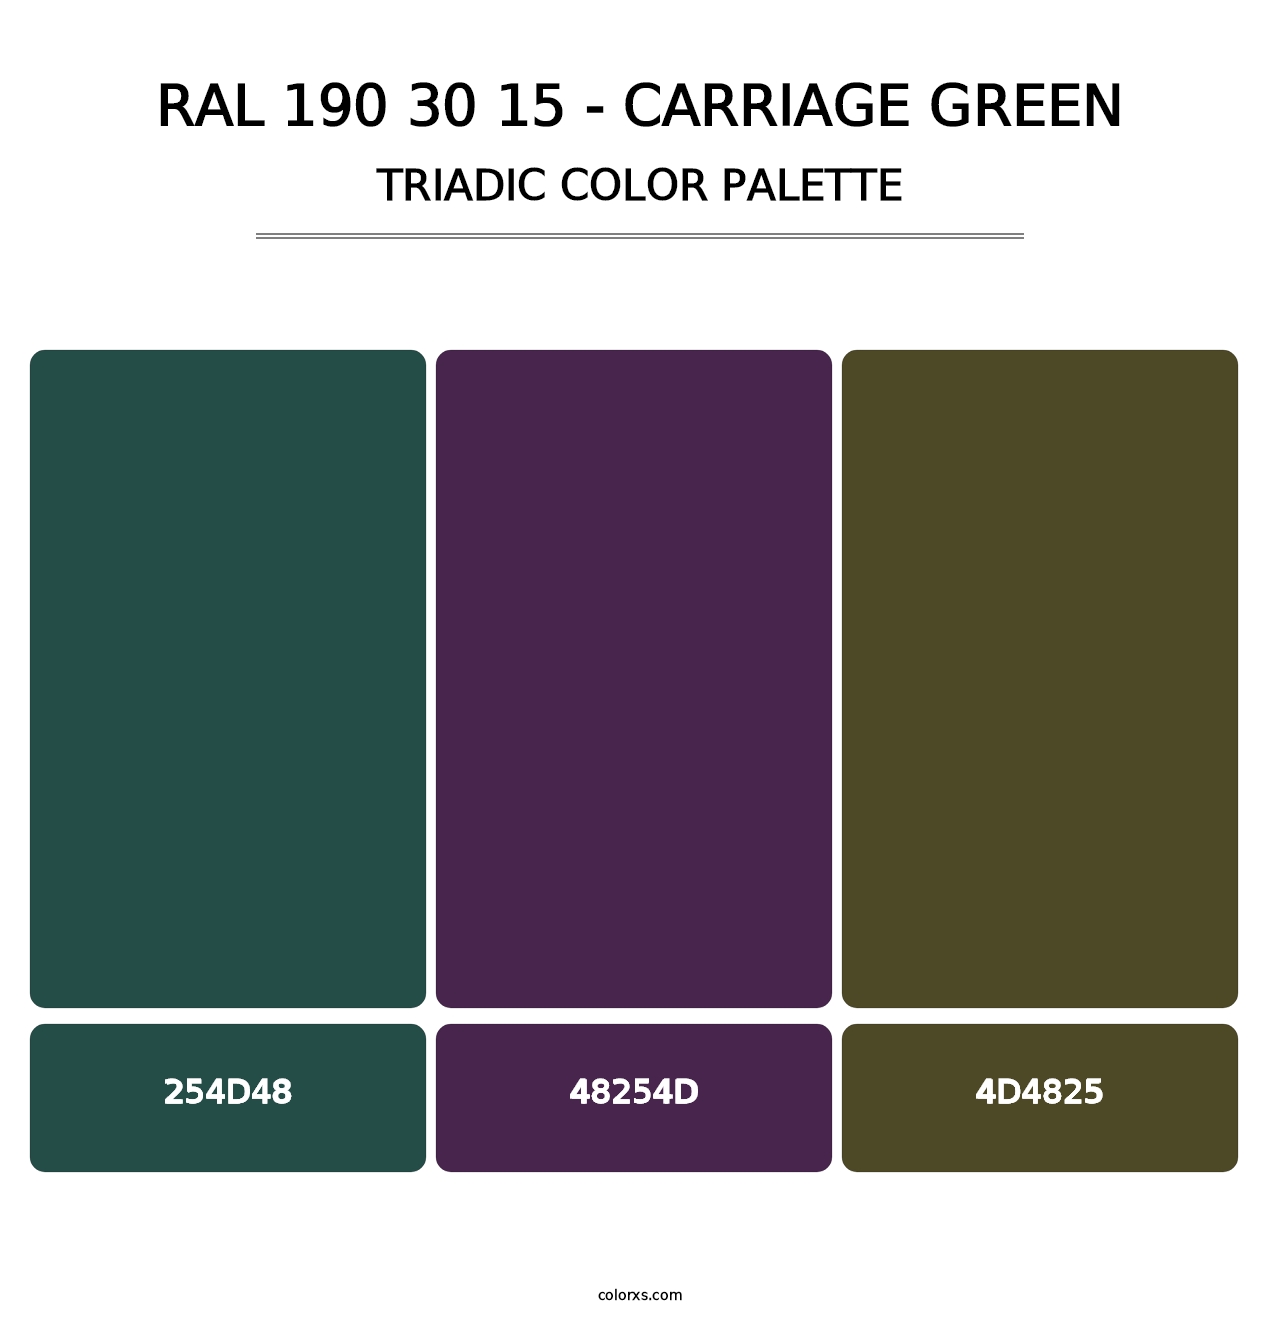 RAL 190 30 15 - Carriage Green - Triadic Color Palette